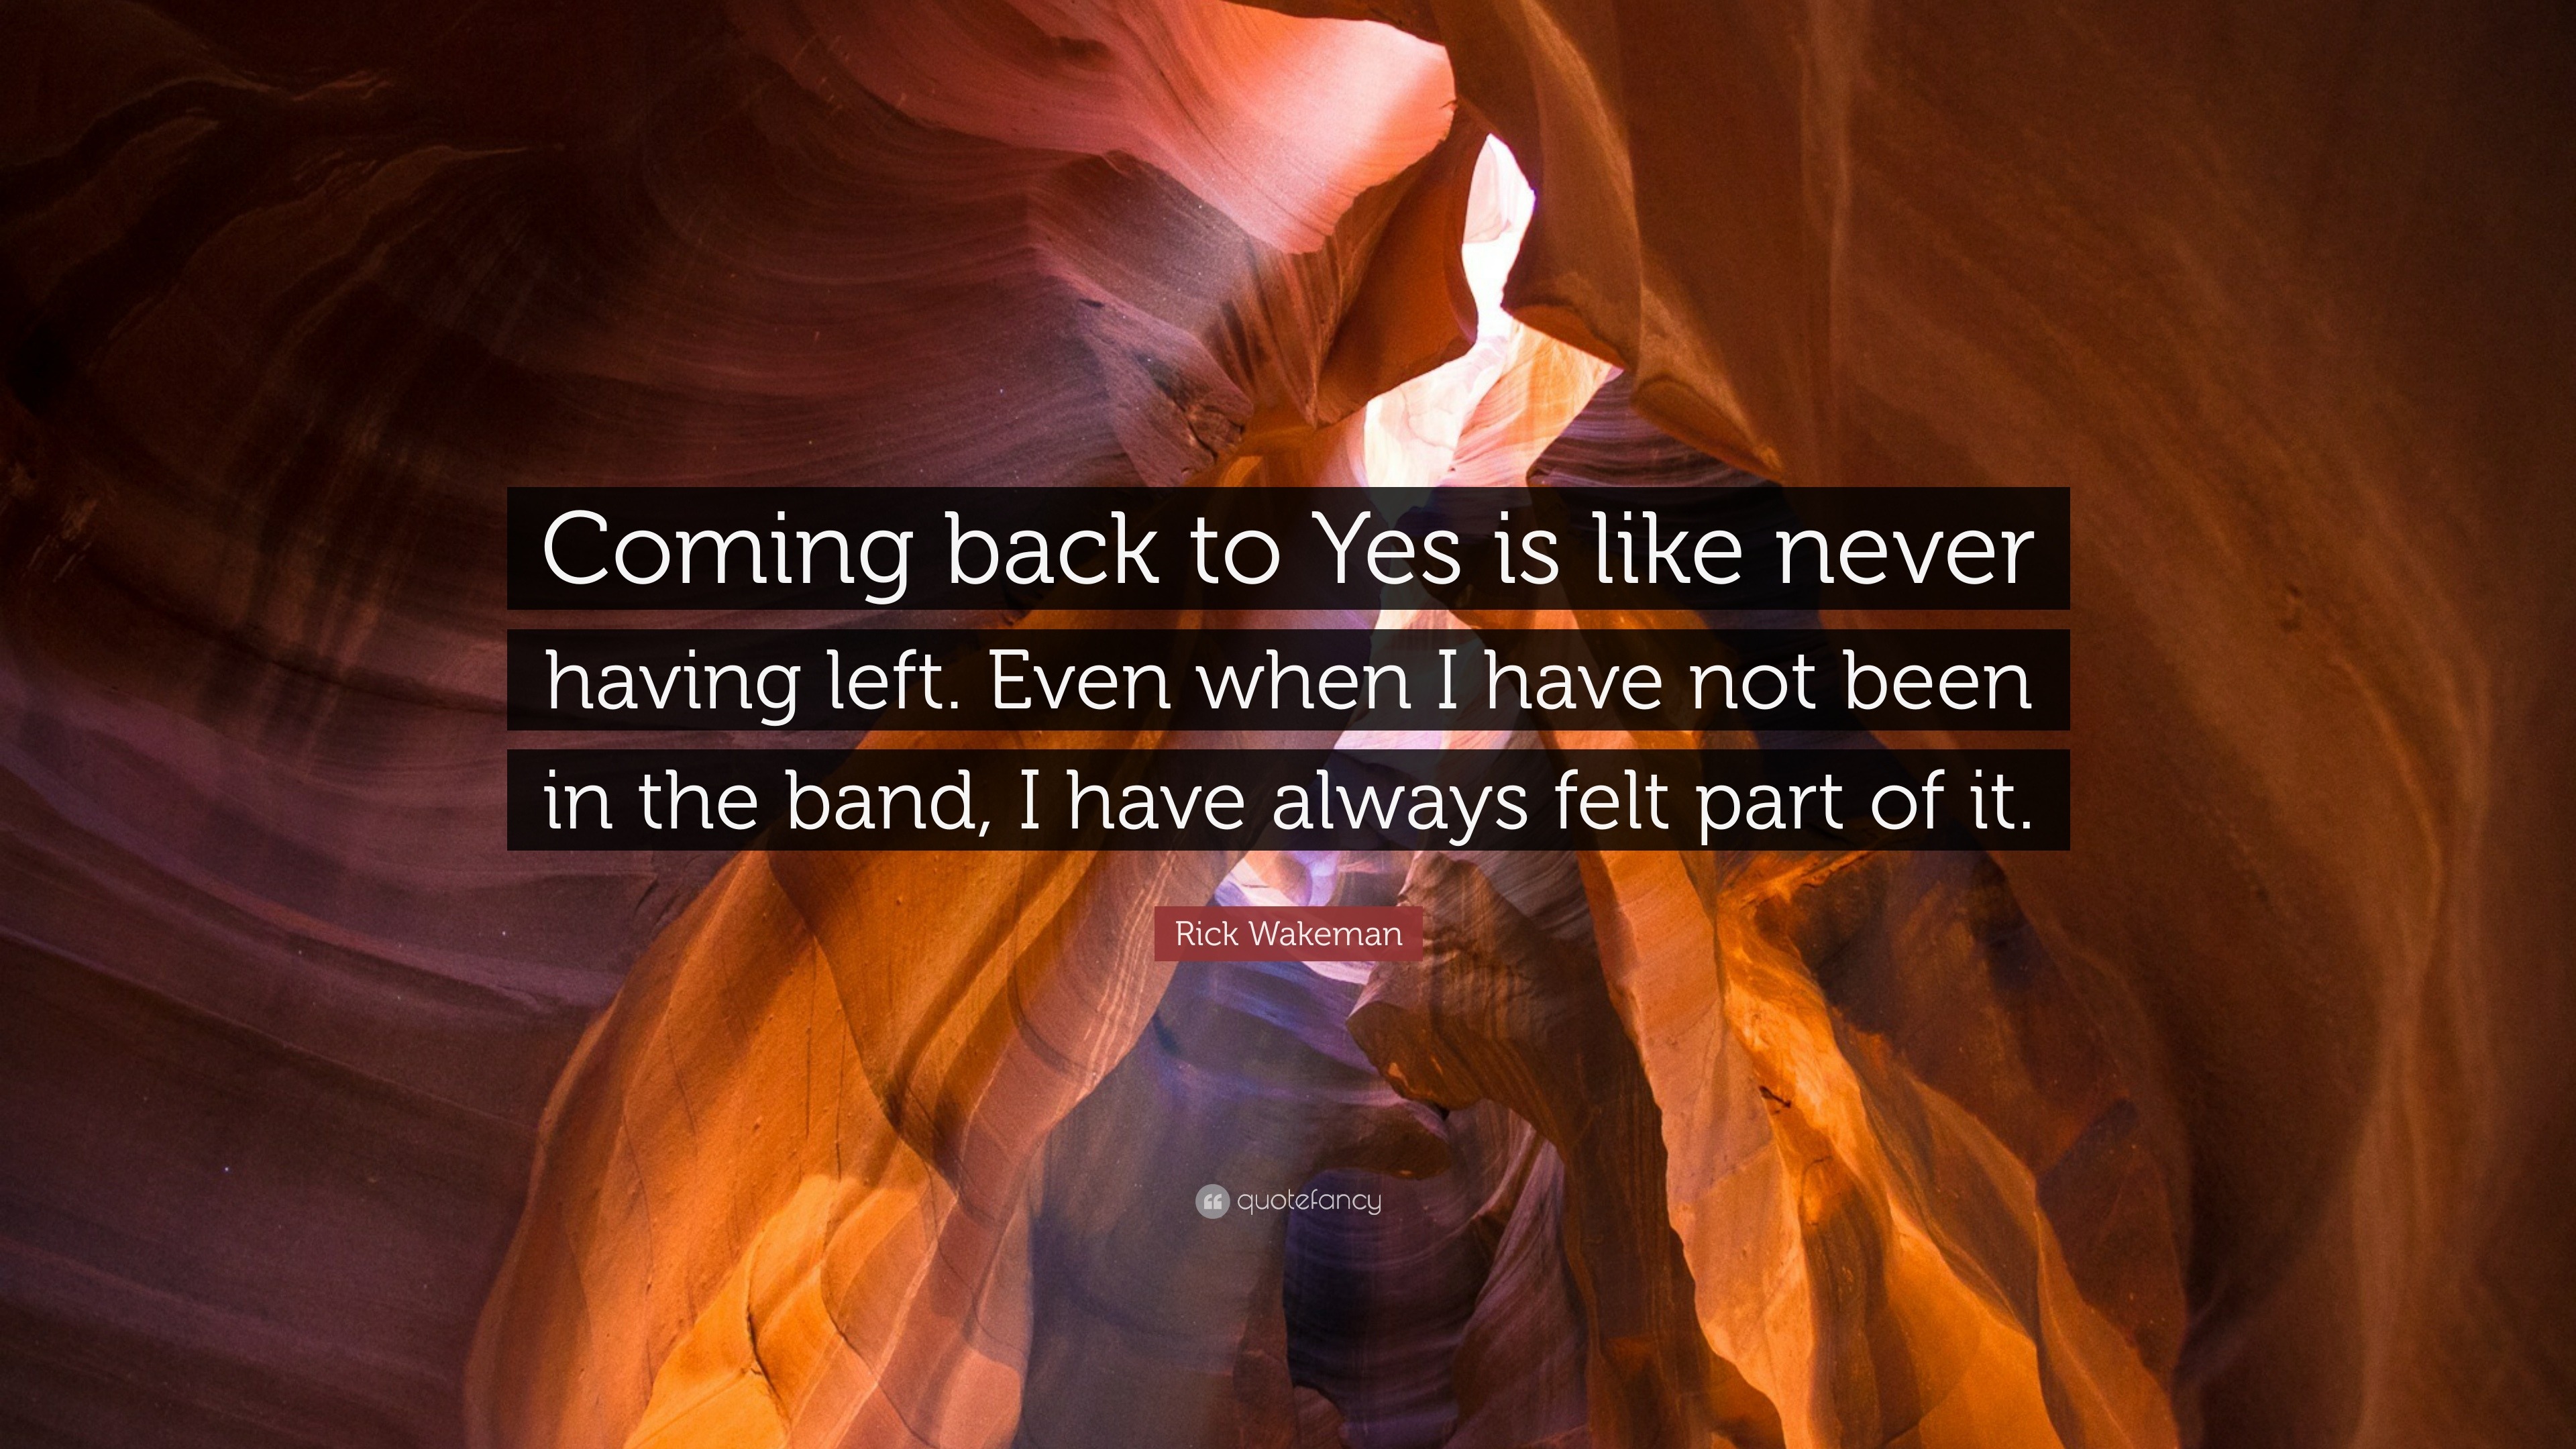 Rick Wakeman Quote: “Coming back to Yes is like never having left. Even  when I have